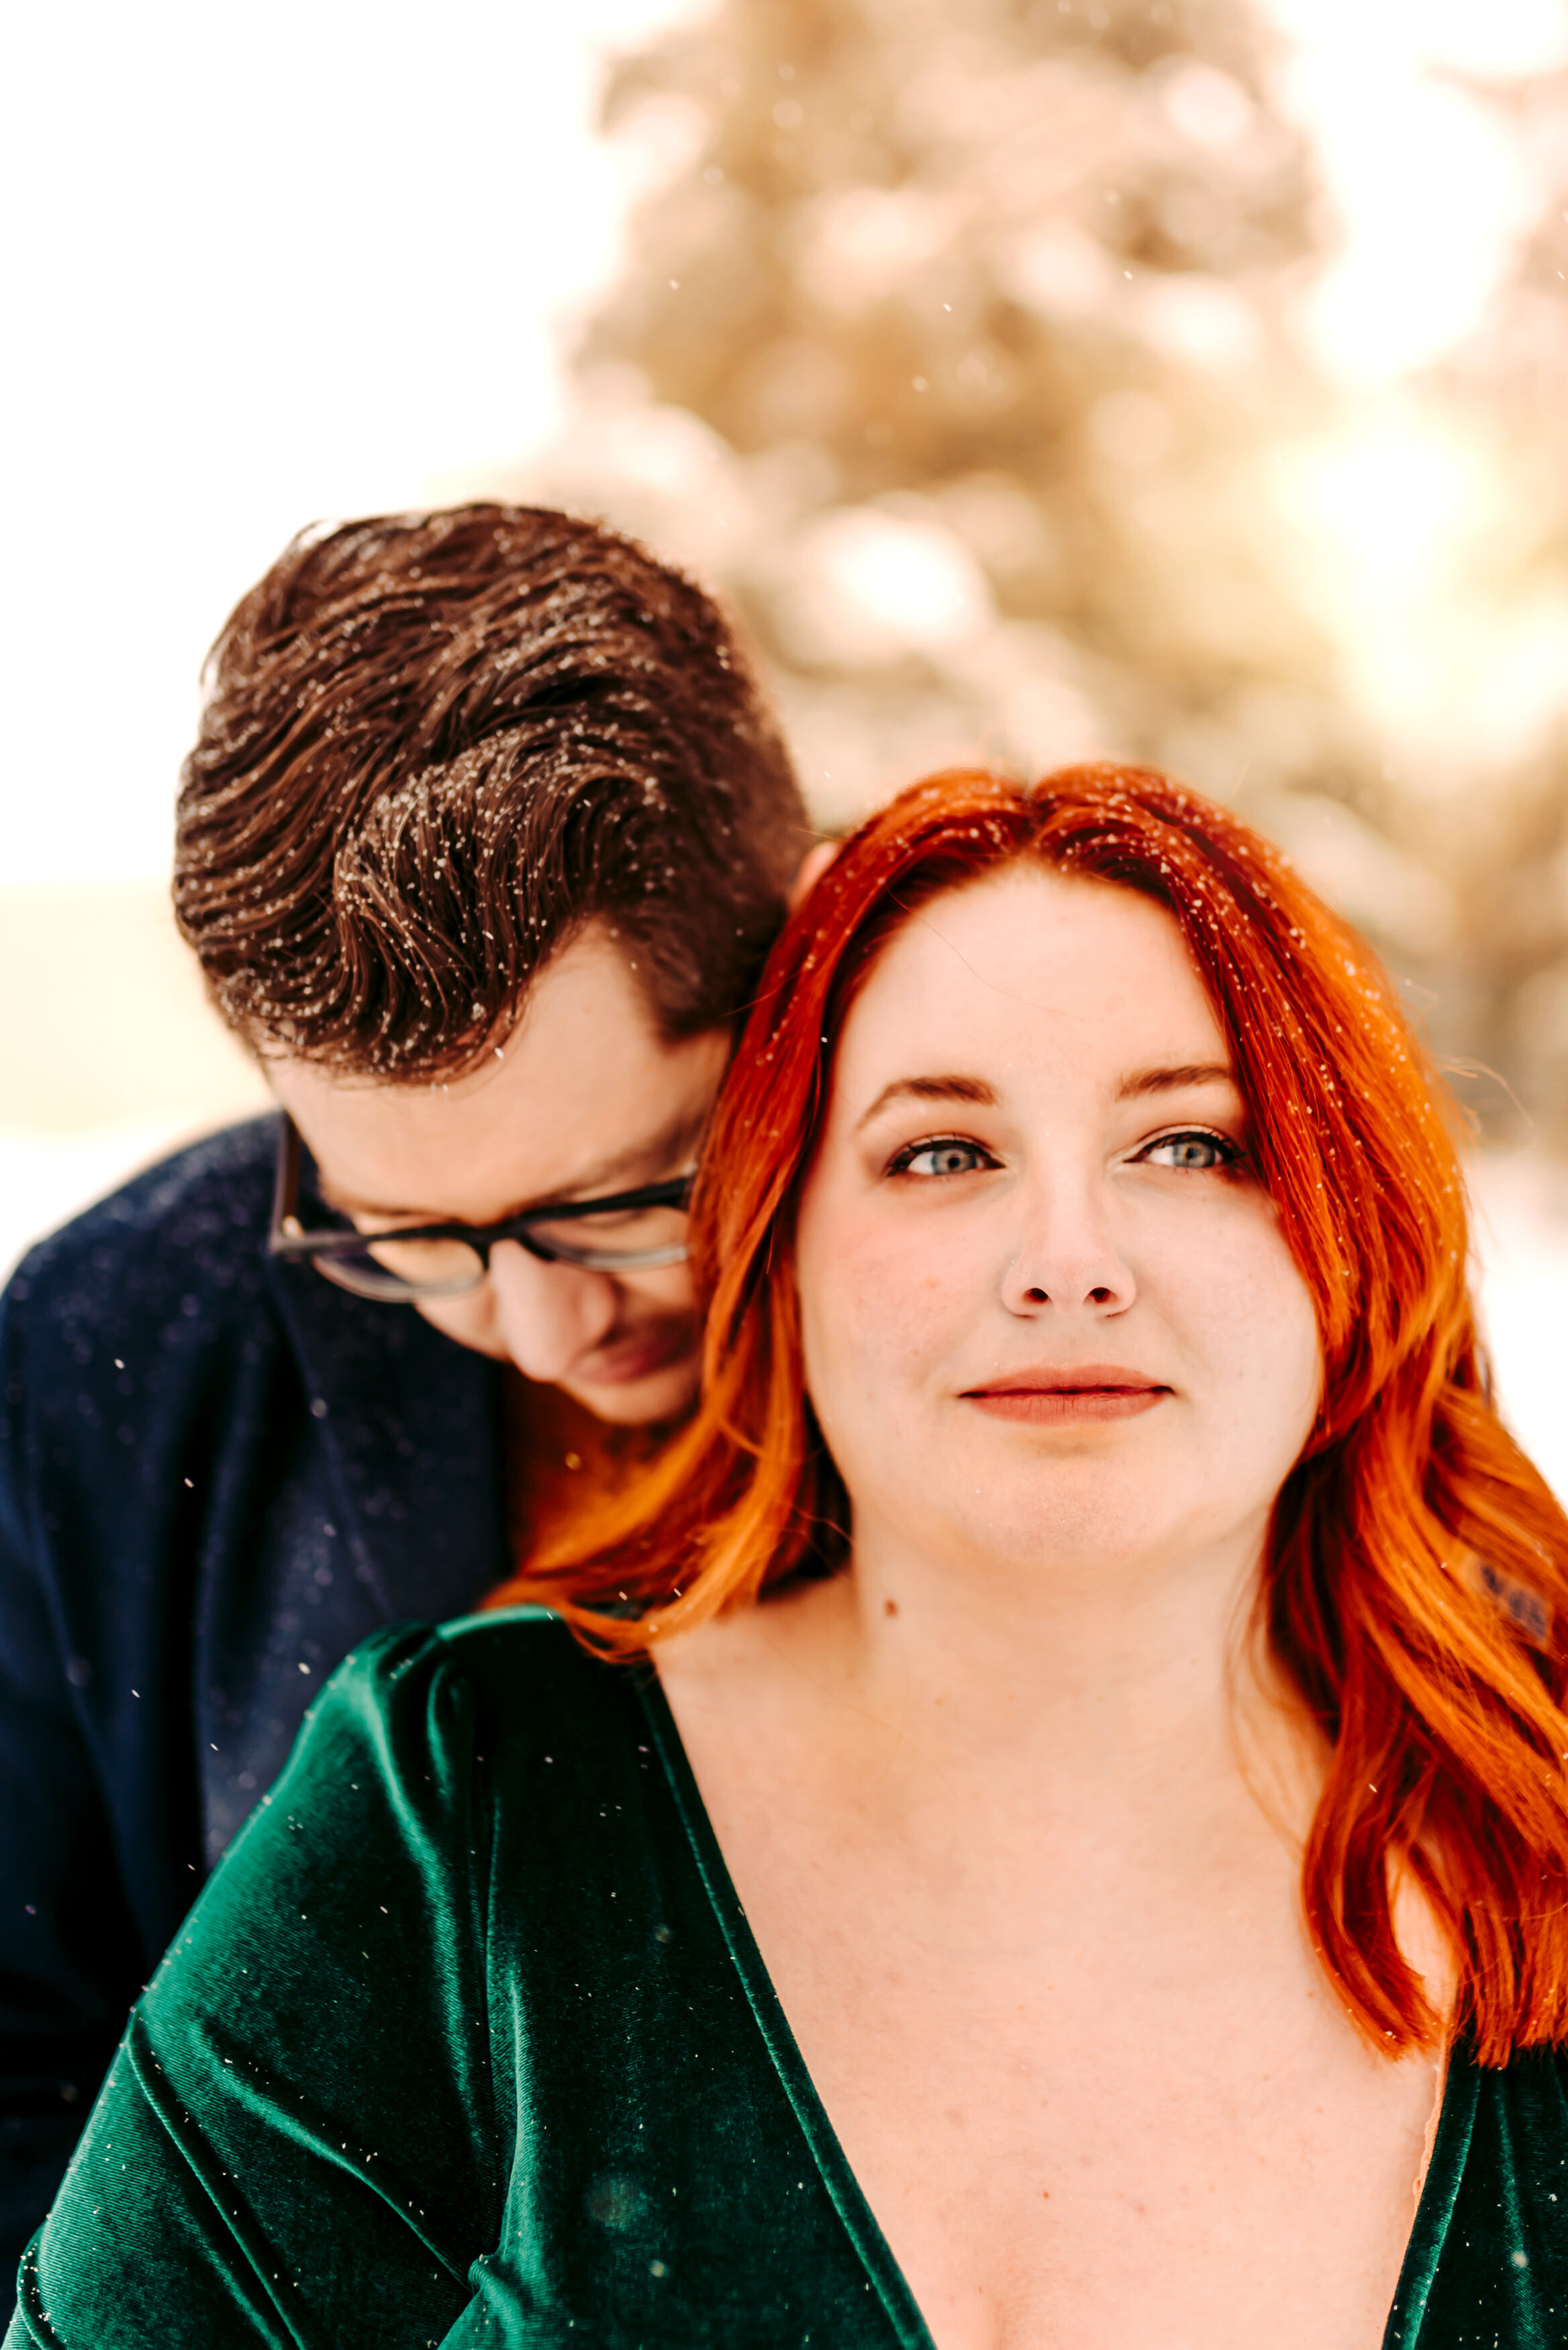 fayetteville-nc-couples-photographer (195)